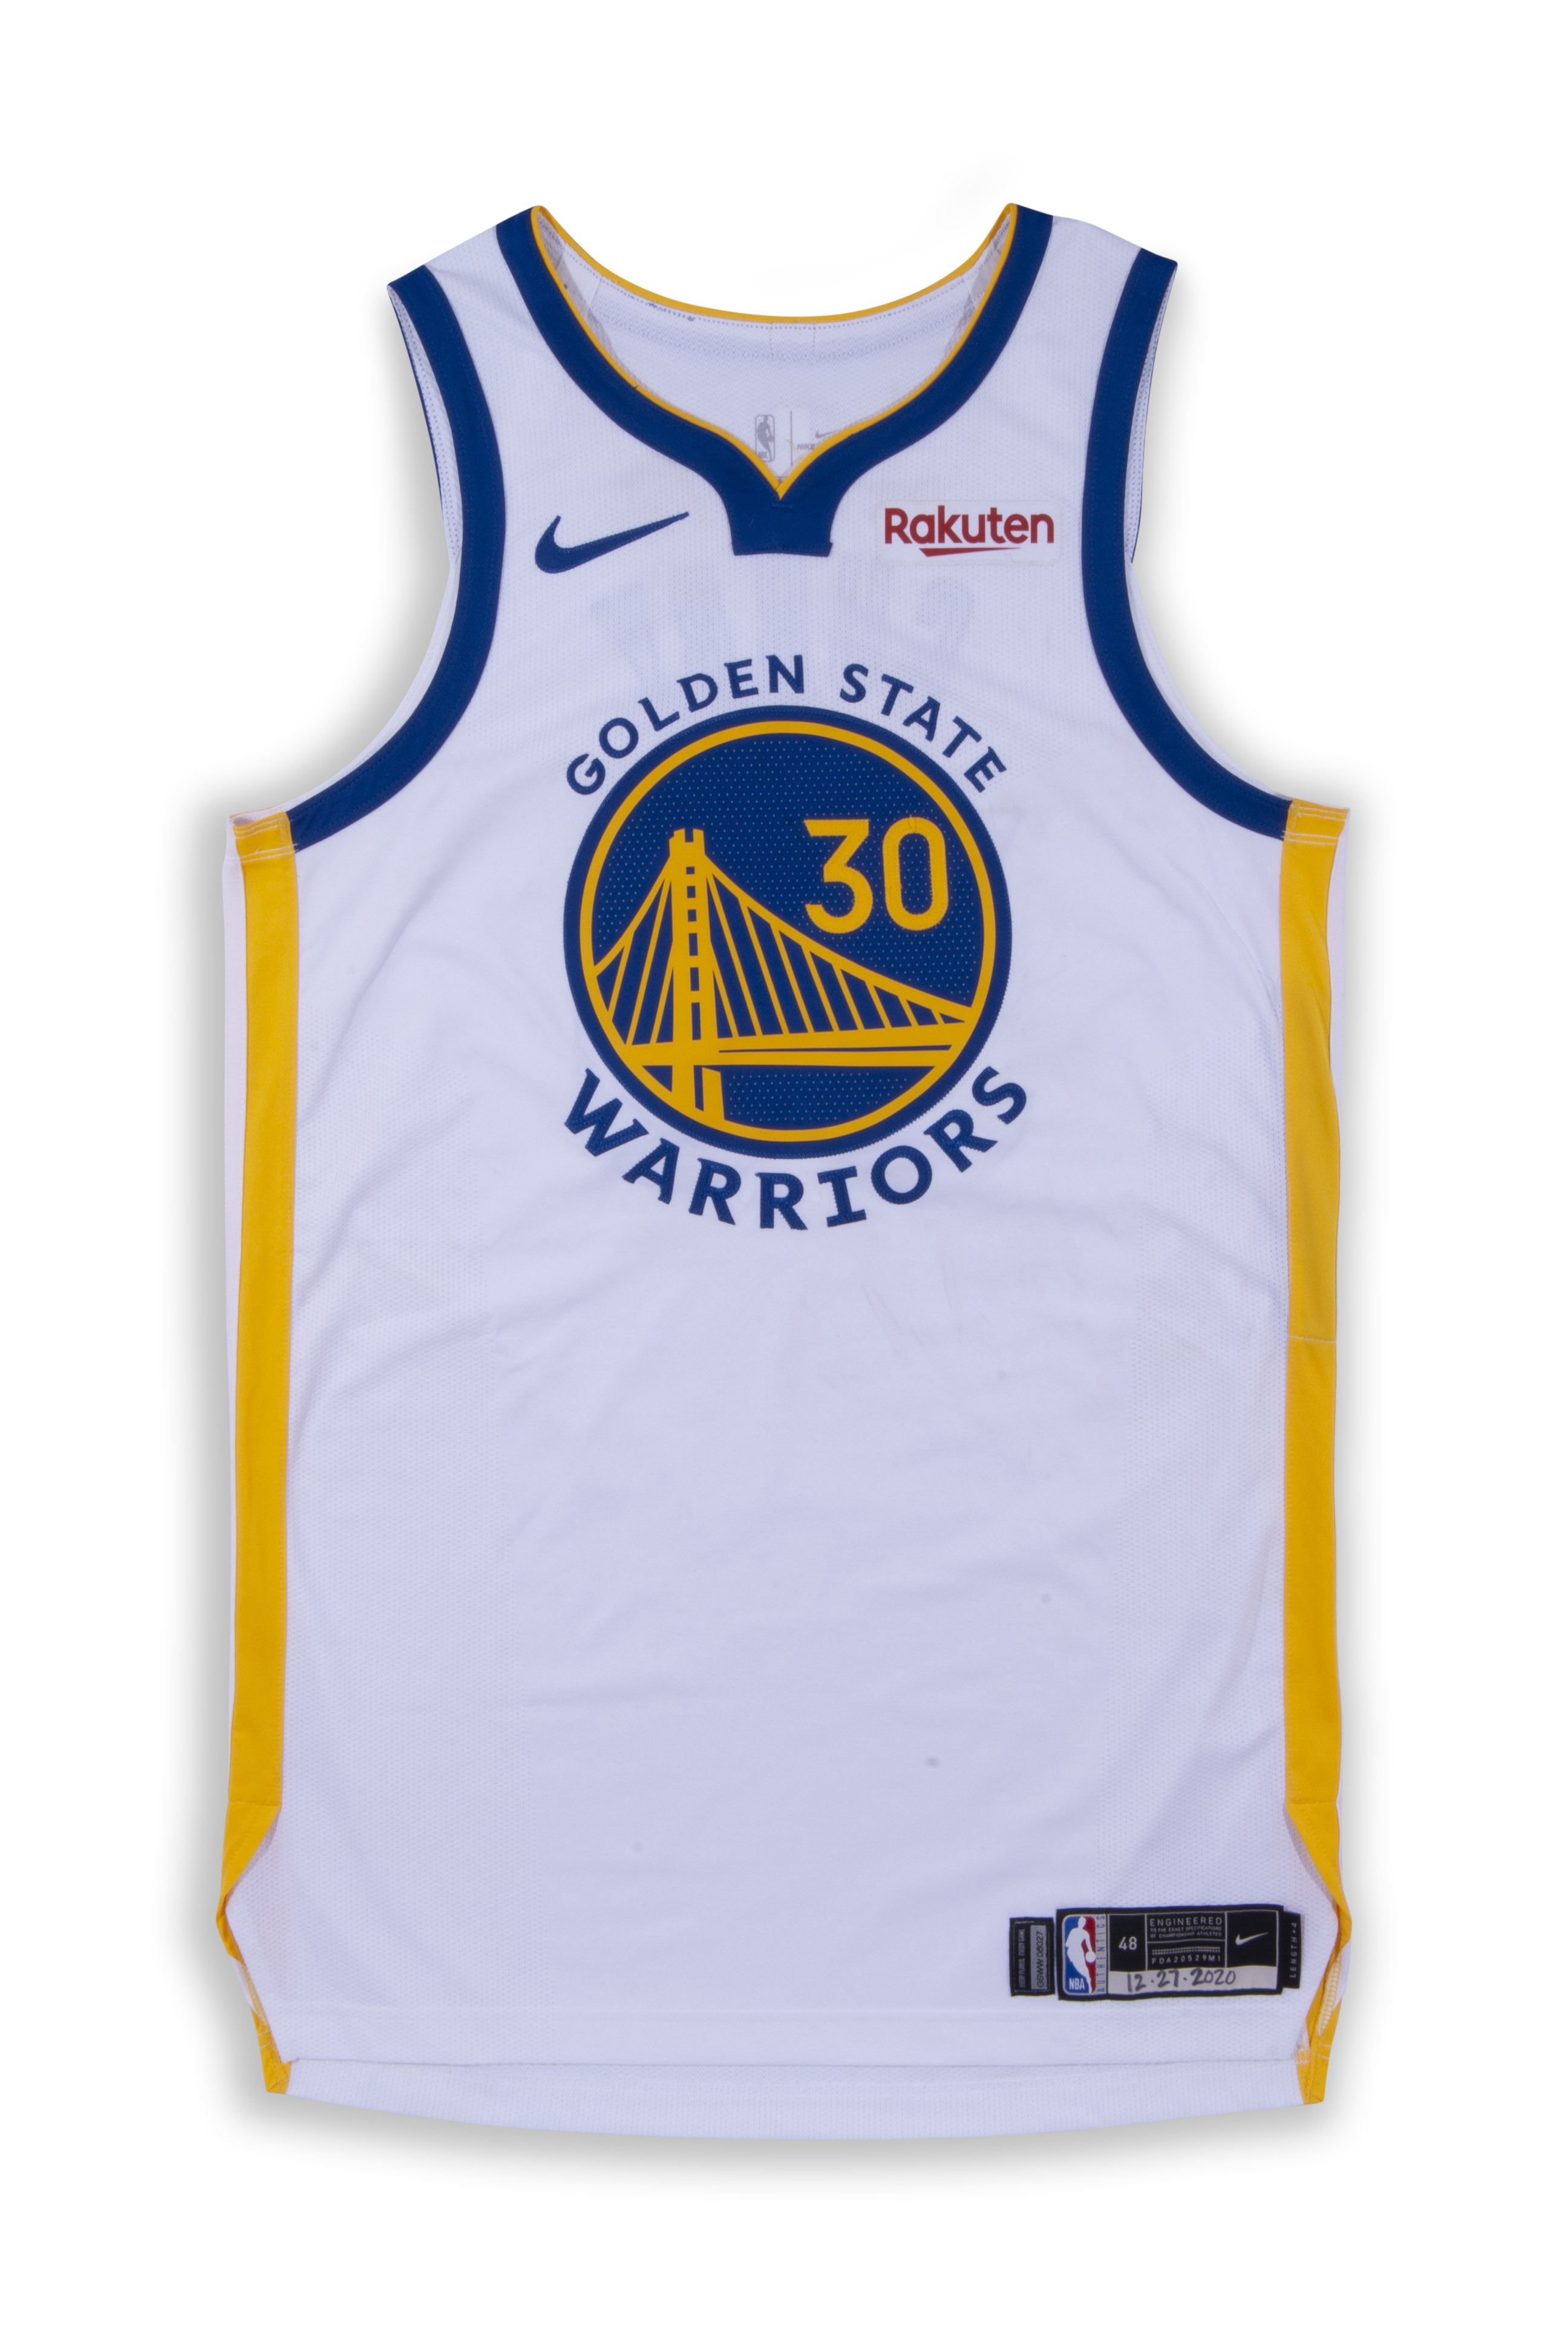 steph curry olympic jersey